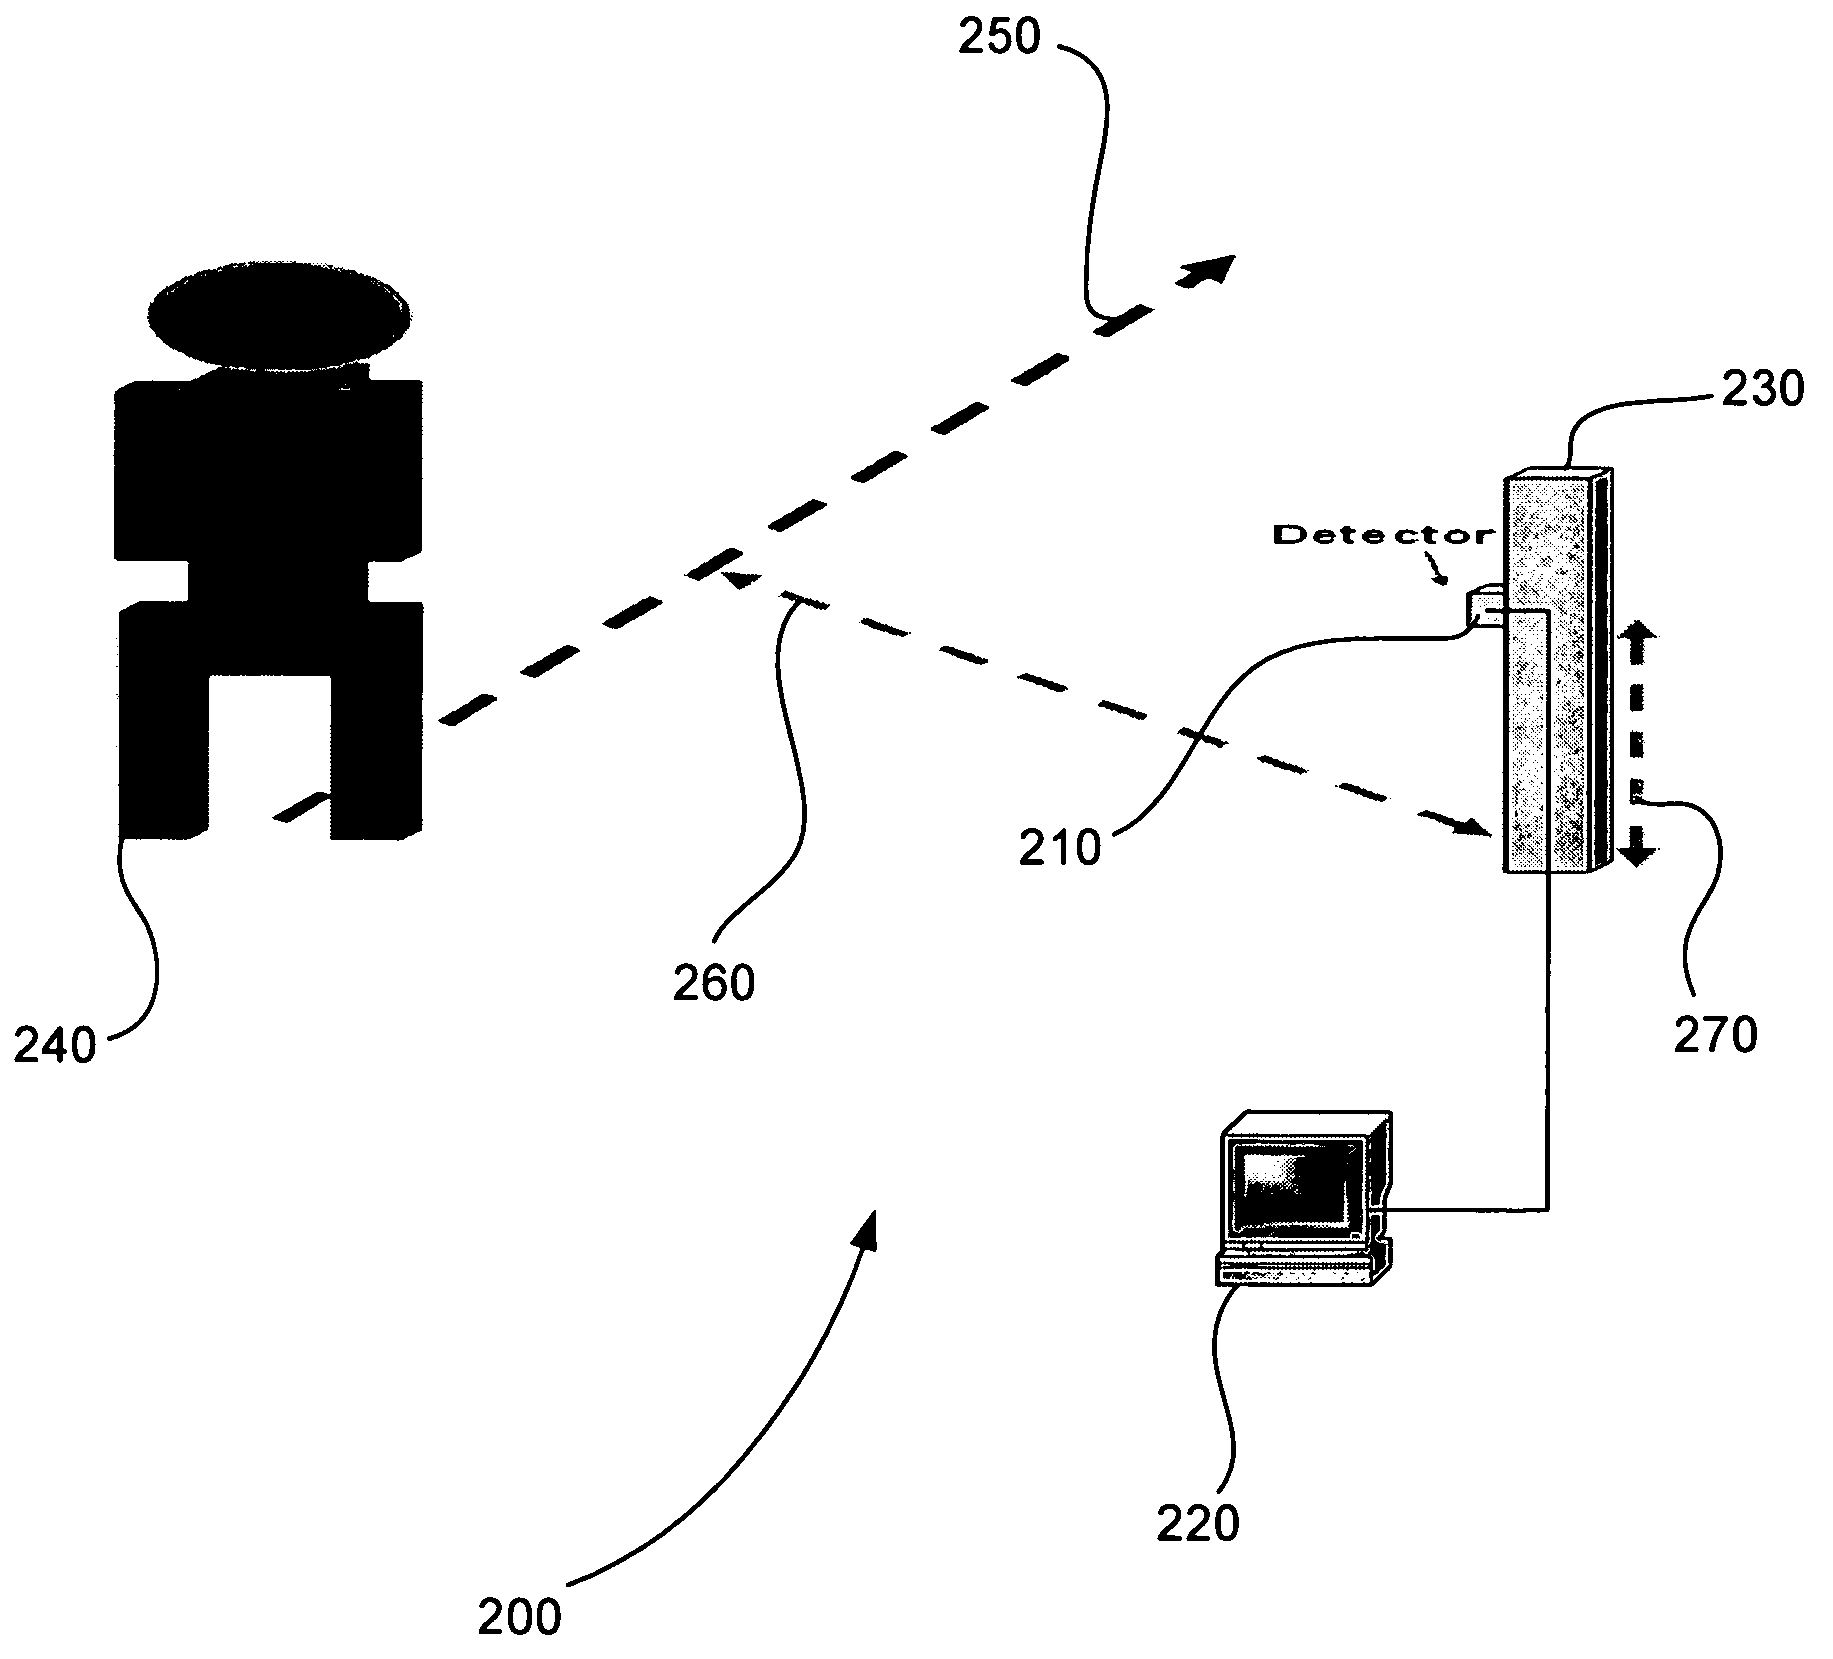 Sensor system for identifying and tracking movements of multiple sources